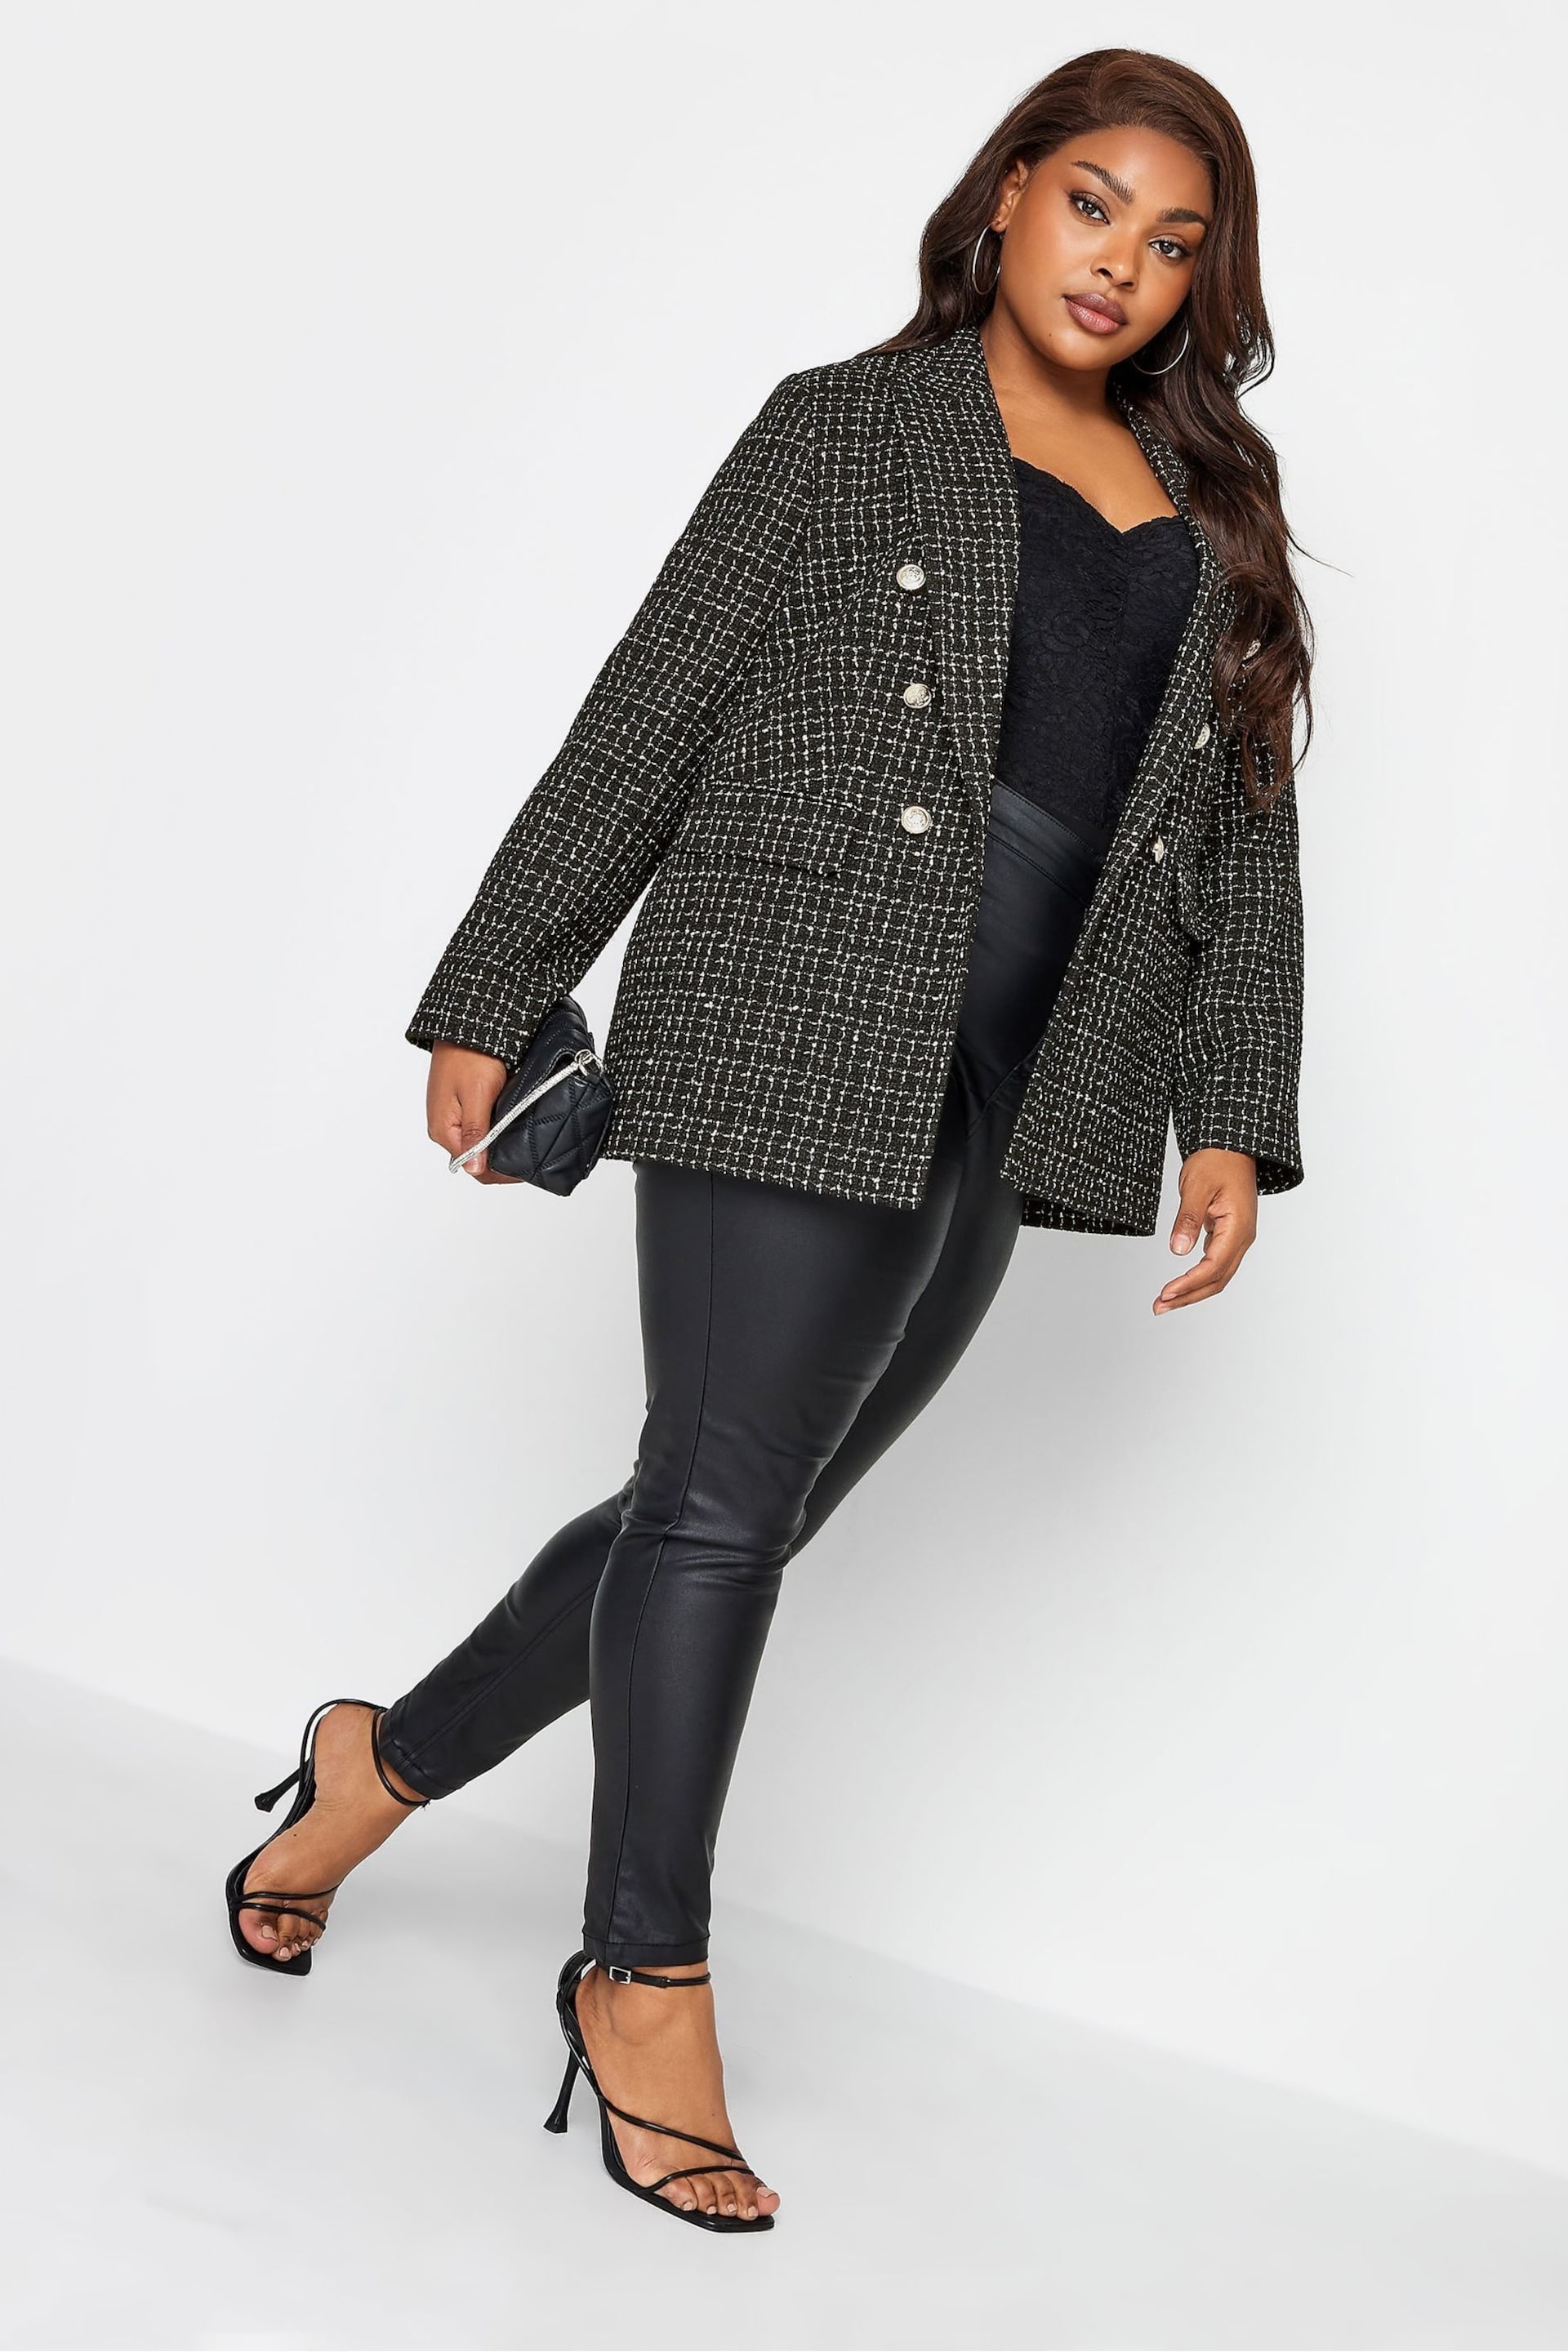 Yours Curve Black Boucle Blazer - Image 2 of 4